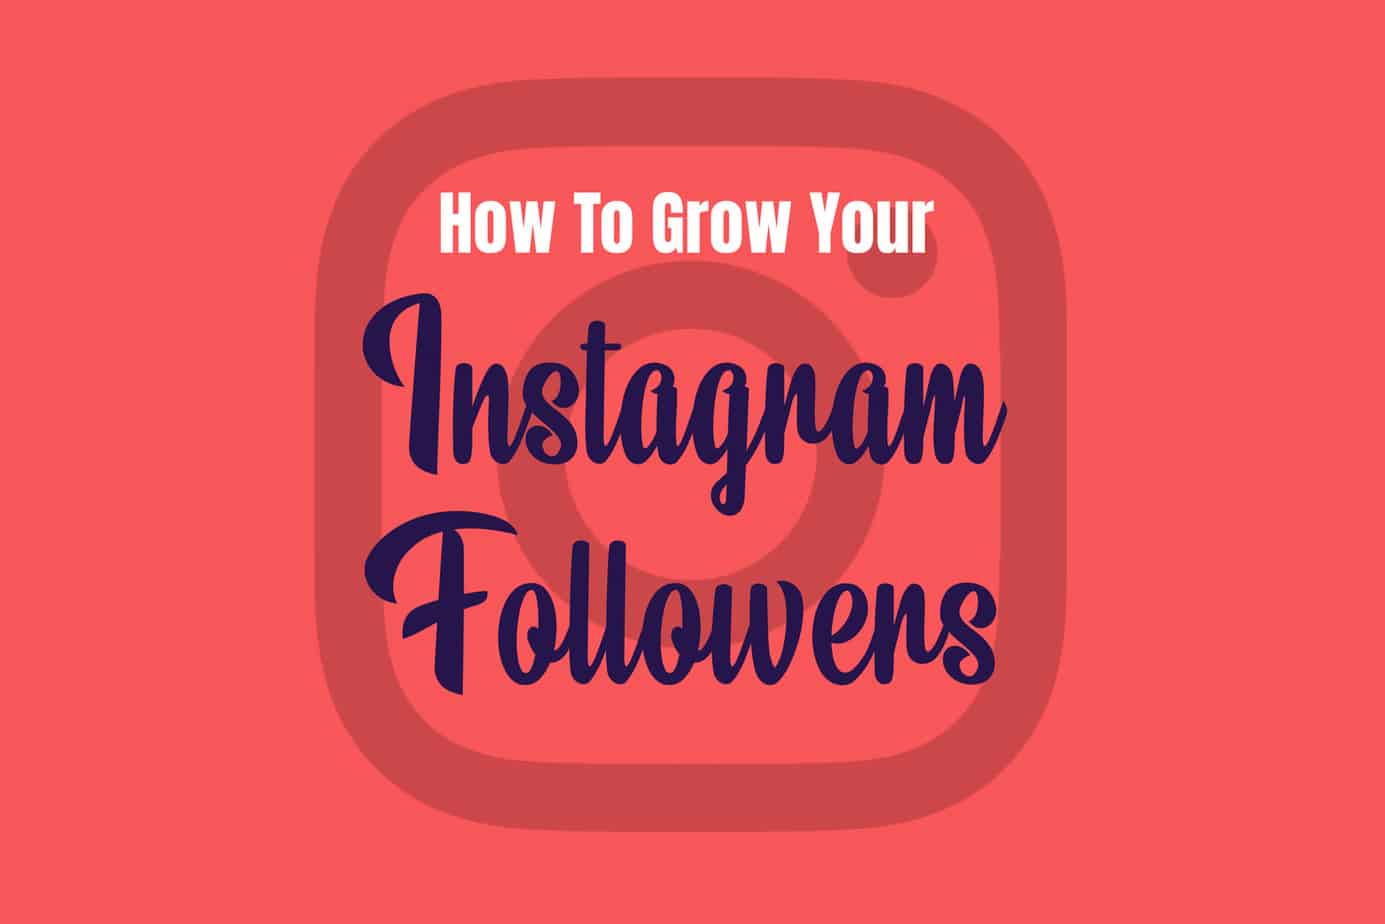 How To Grow Instagram Followers Tips for Influencer Success